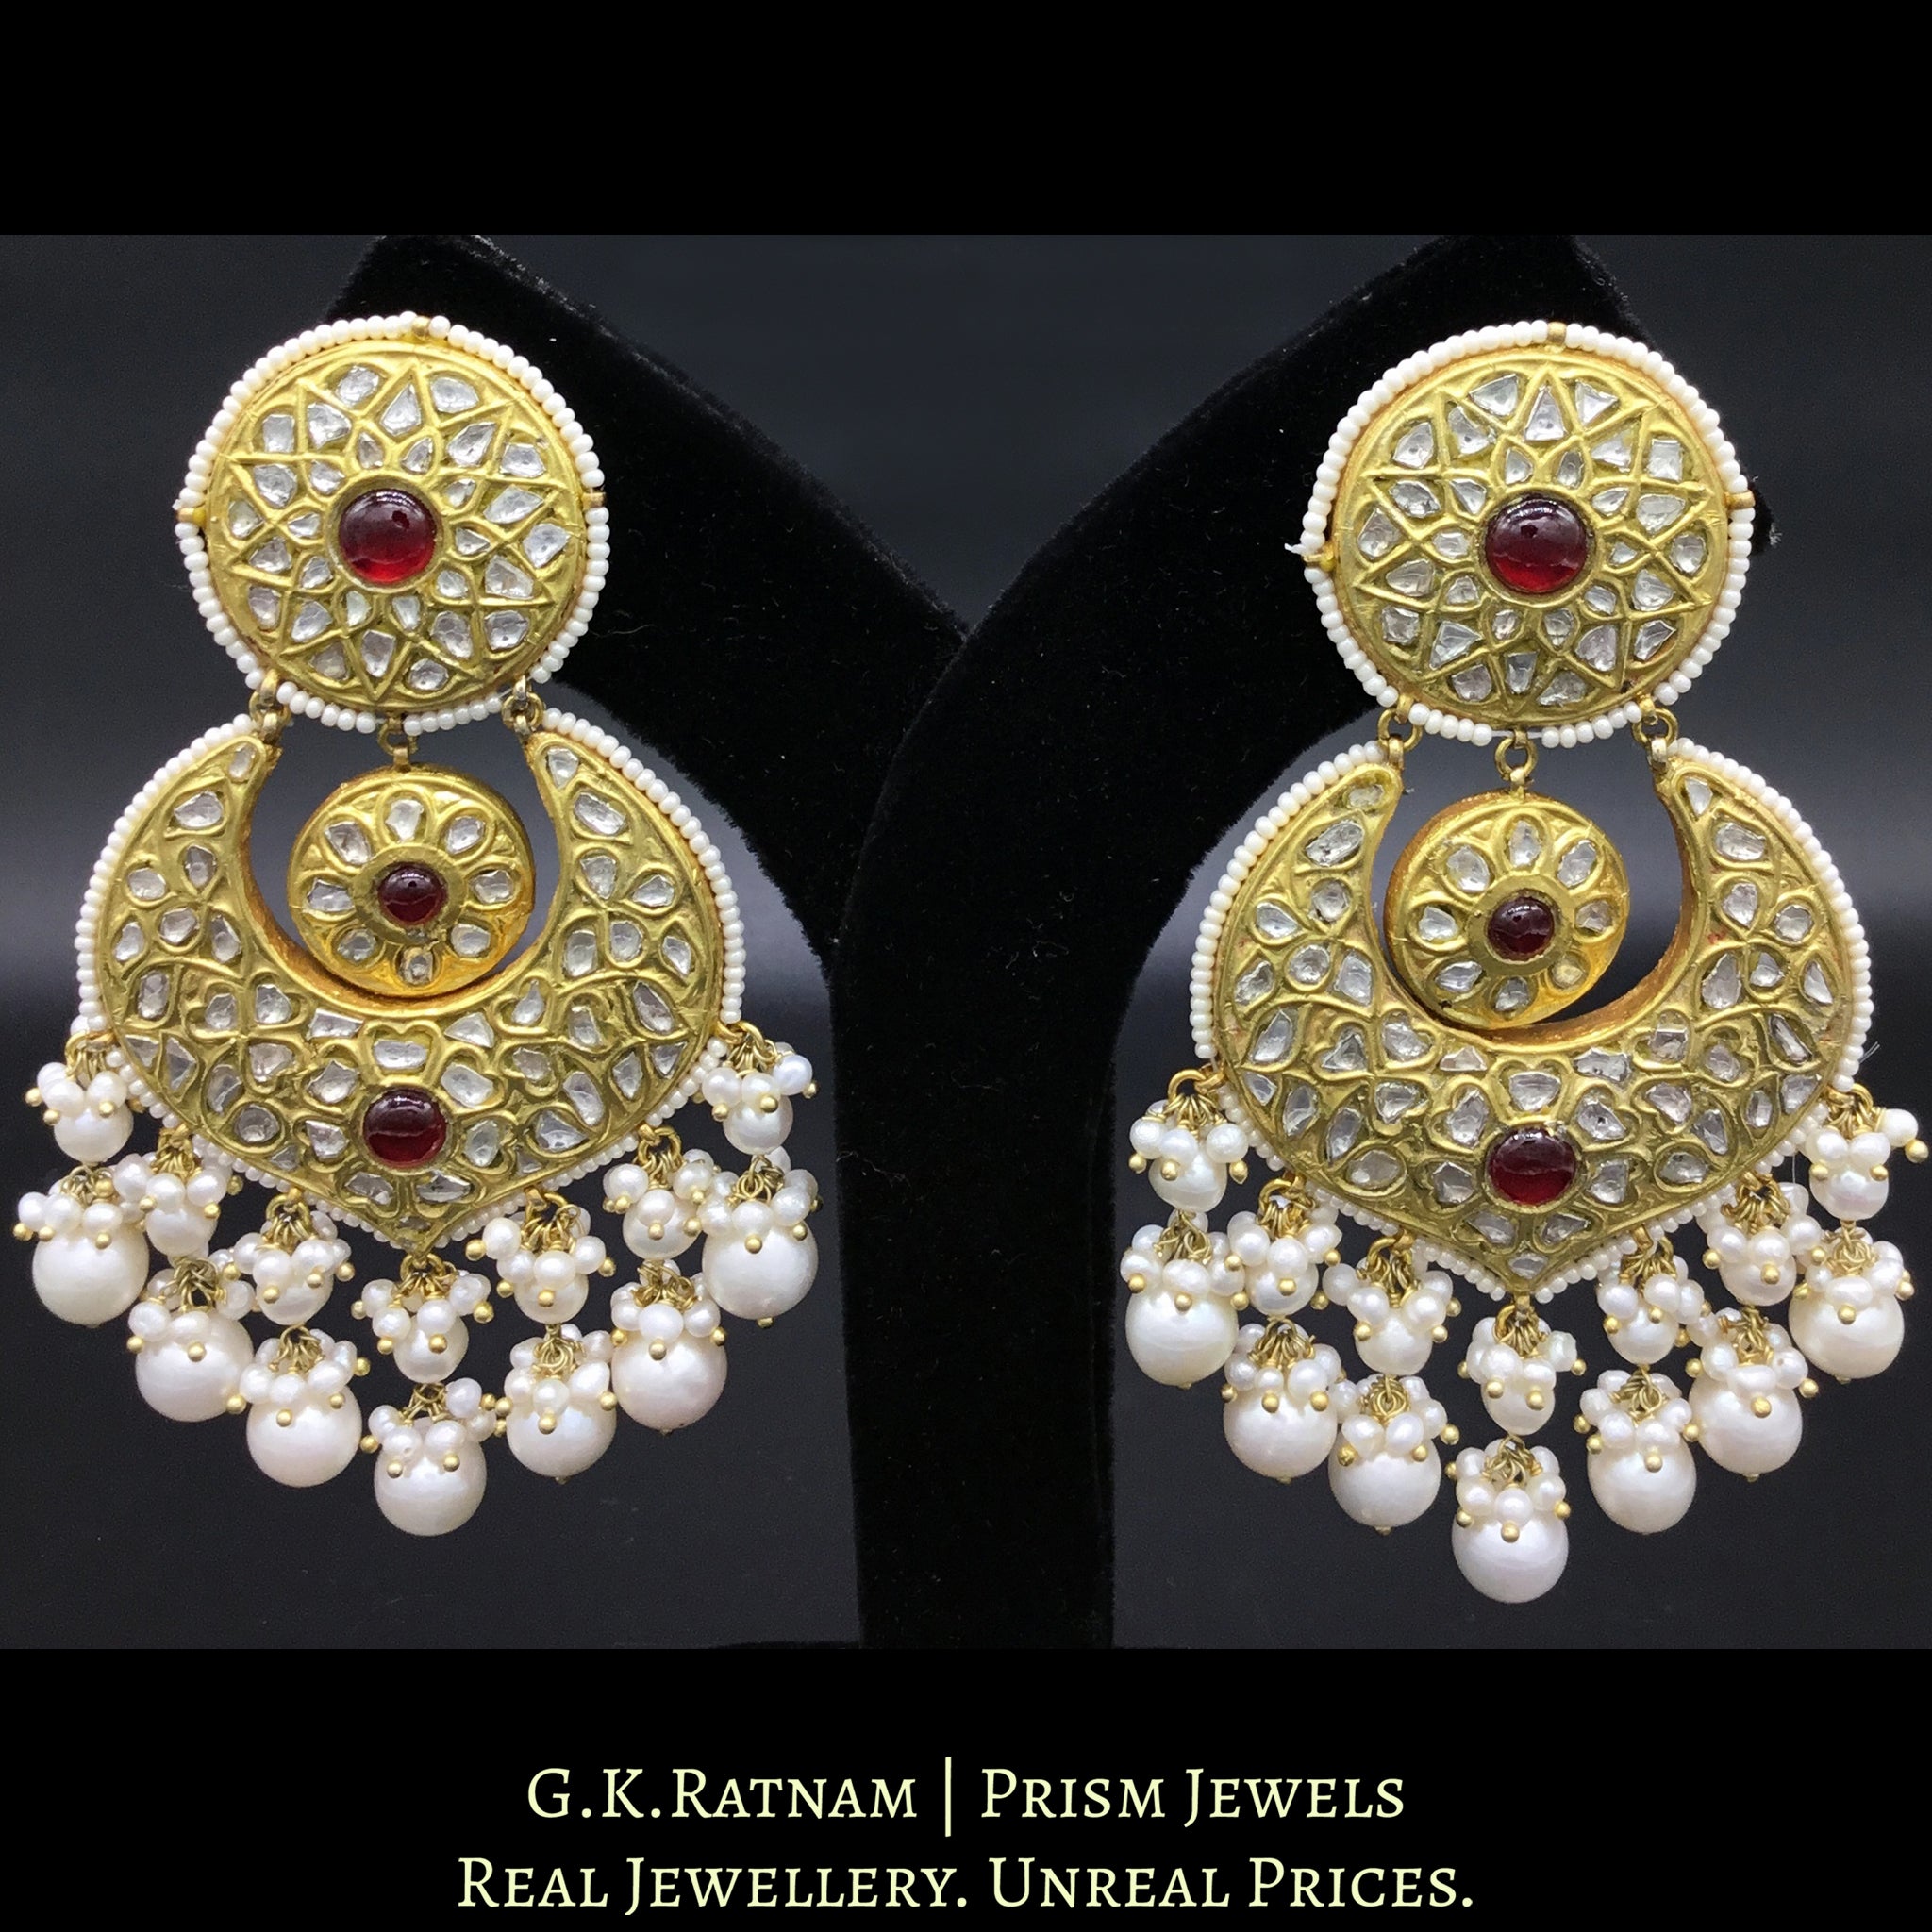 23k Gold and Diamond Polki Chand Bali Earring Pair with ruby-red center